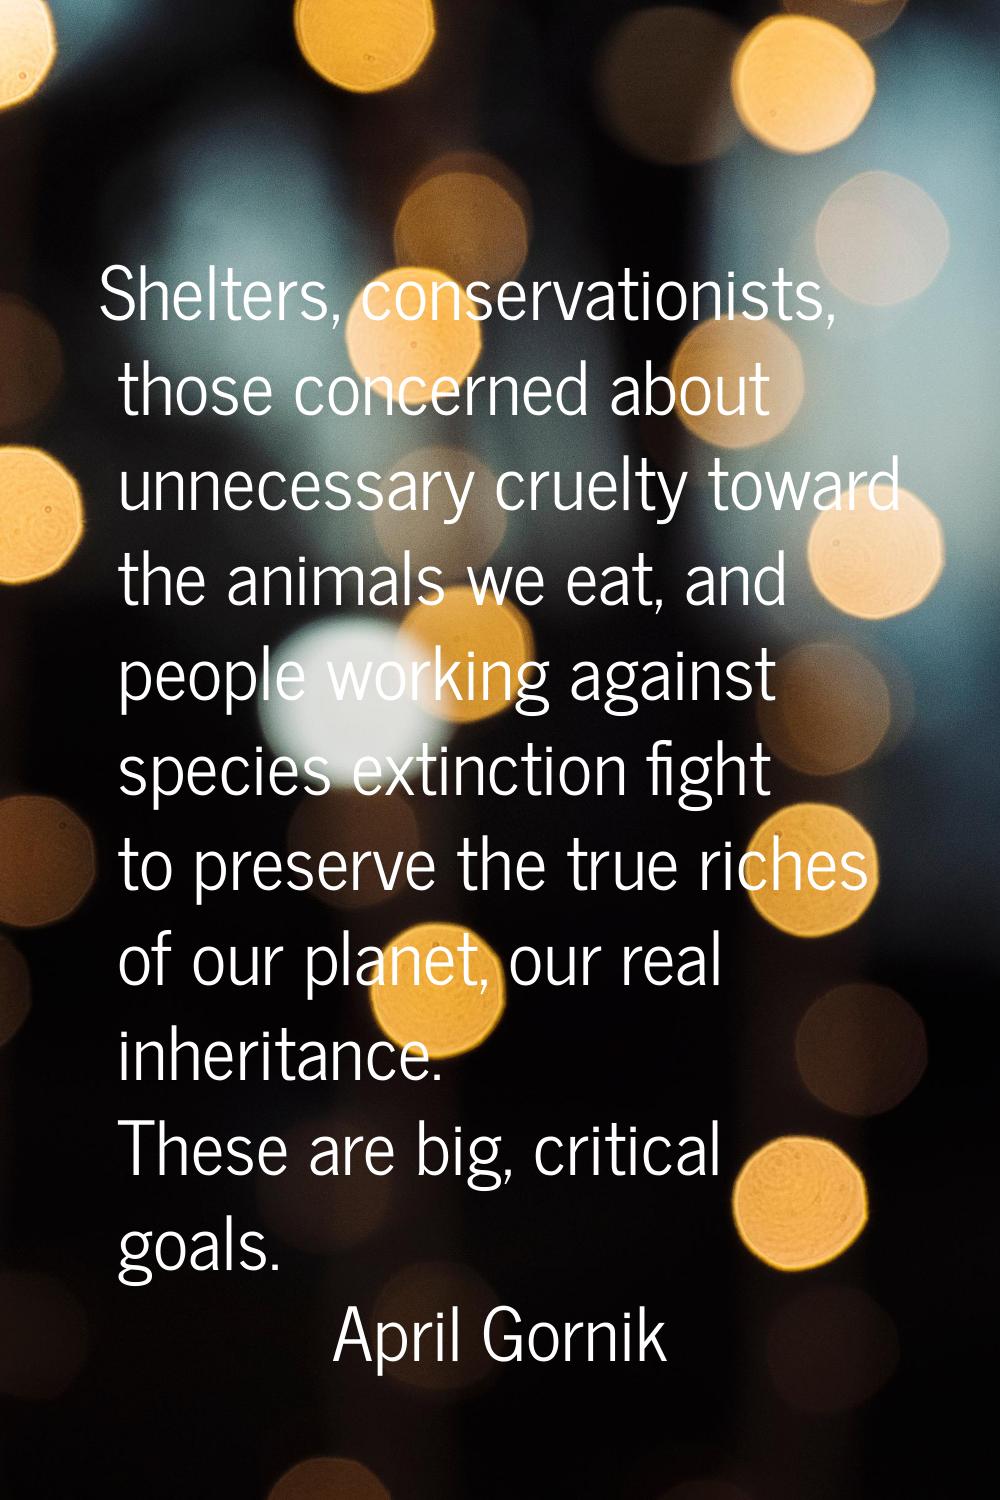 Shelters, conservationists, those concerned about unnecessary cruelty toward the animals we eat, an